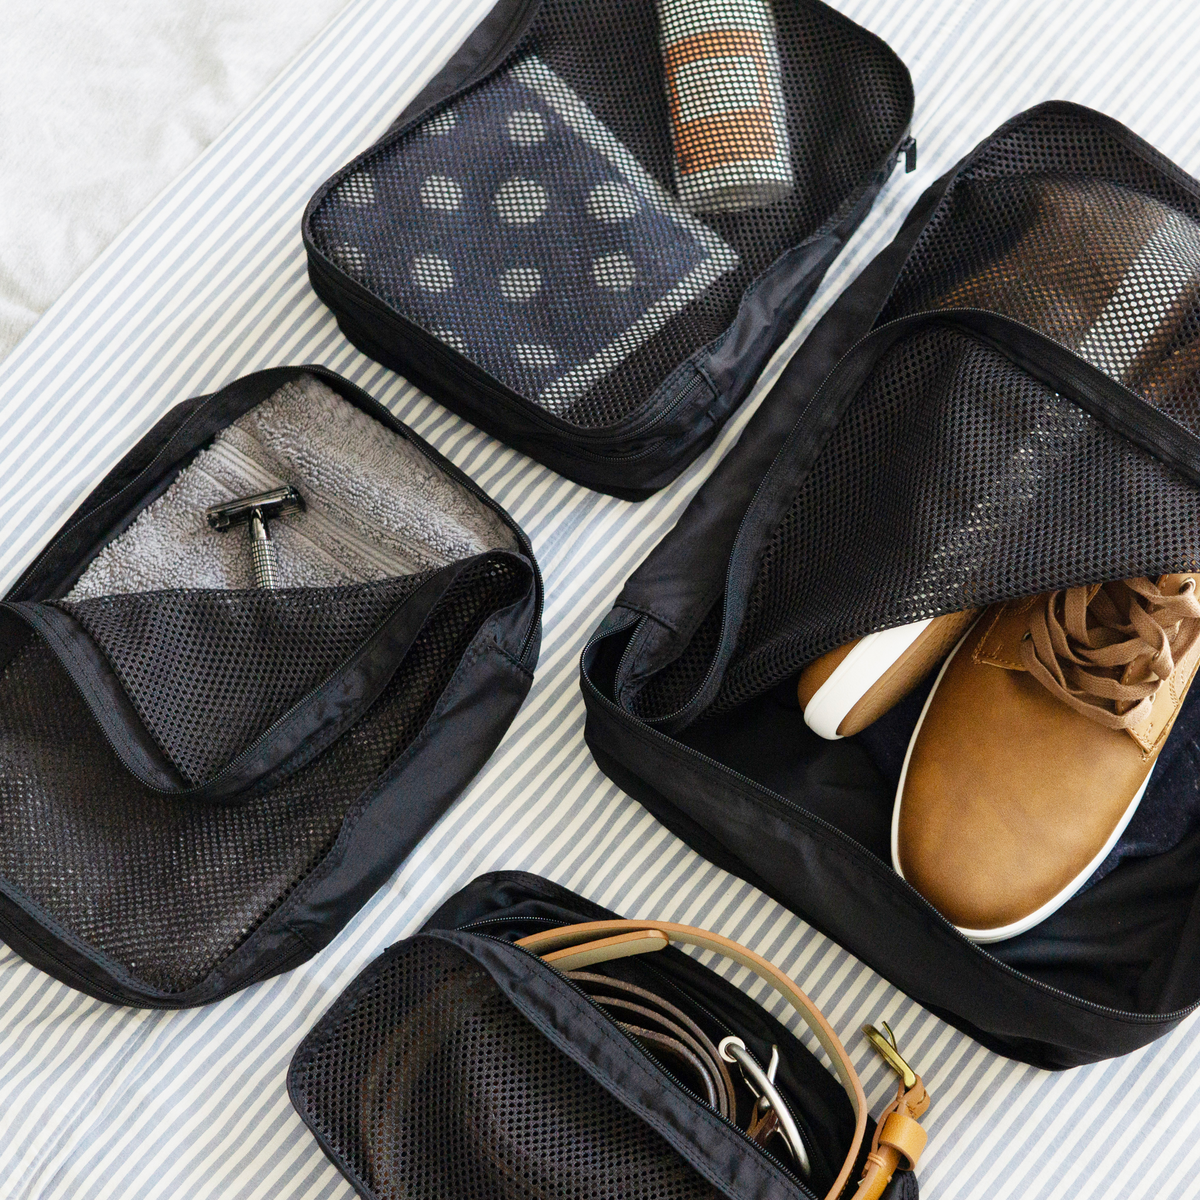 4 packing cubes shown packed with shoes, belts, toiletries, and clothing to demonstrate the versatile organization the packing cubes can provide and how easily visible the contents of the bags are so you always know where to look.